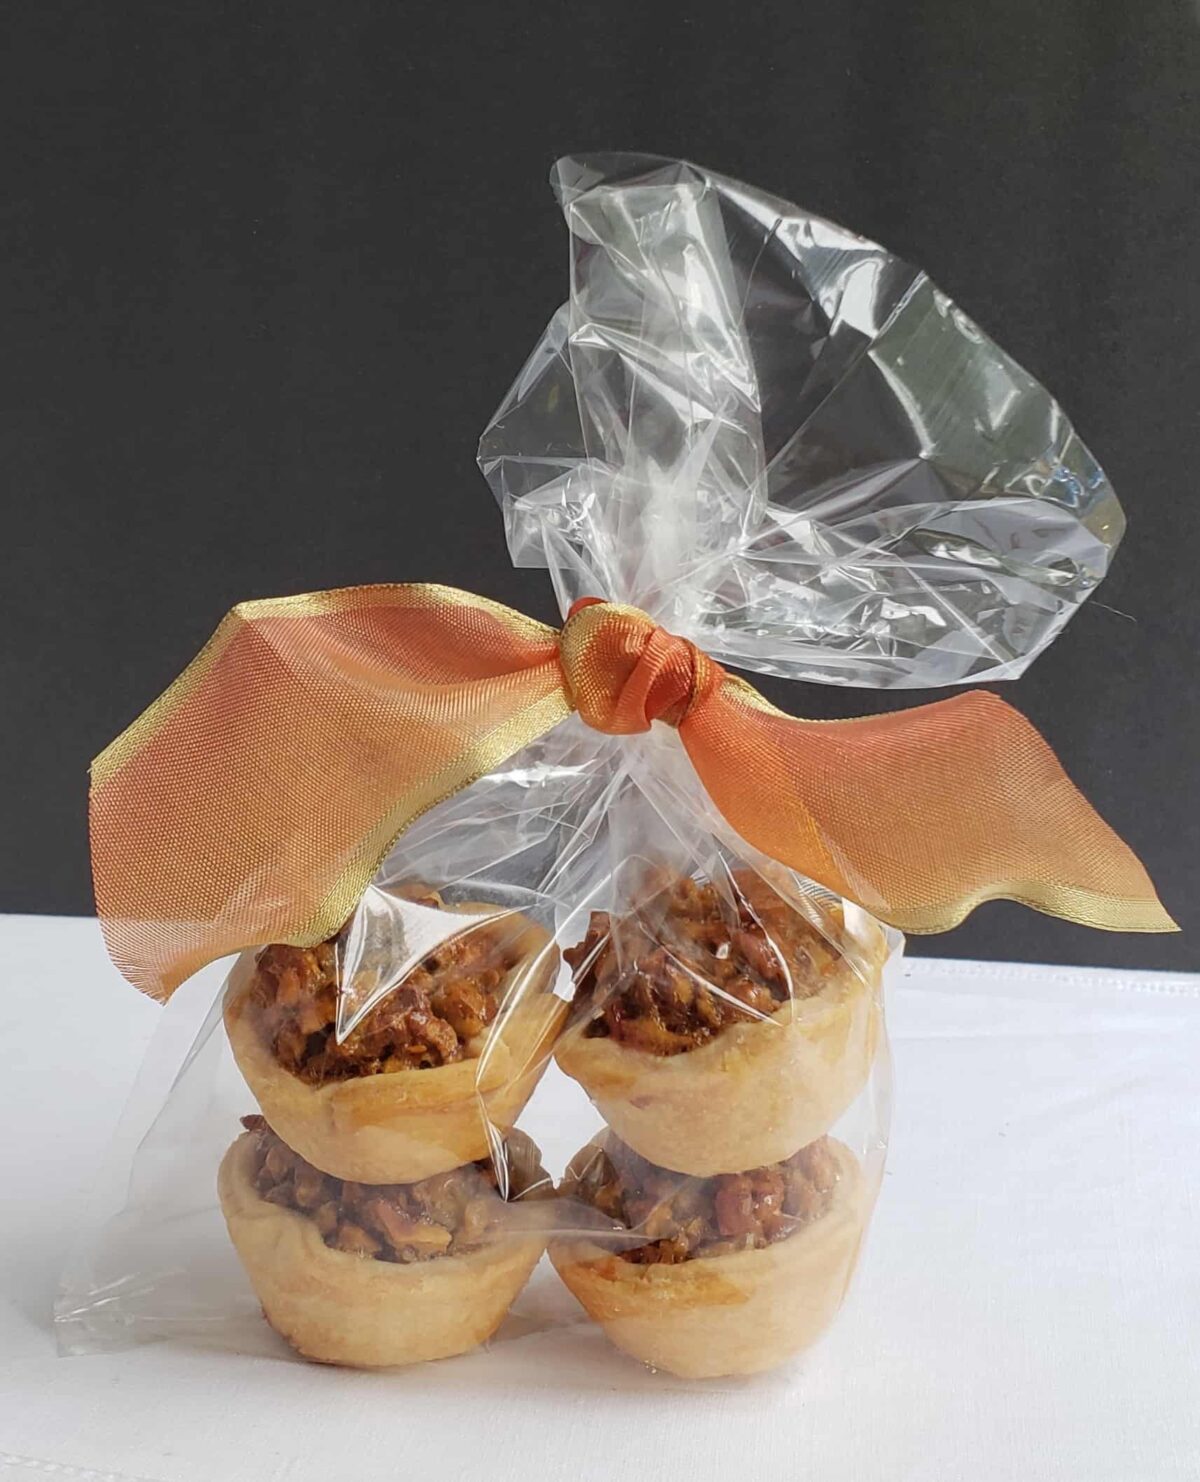 Four Maple Pecan Tassies wrapped in a clear bag with an orange bow